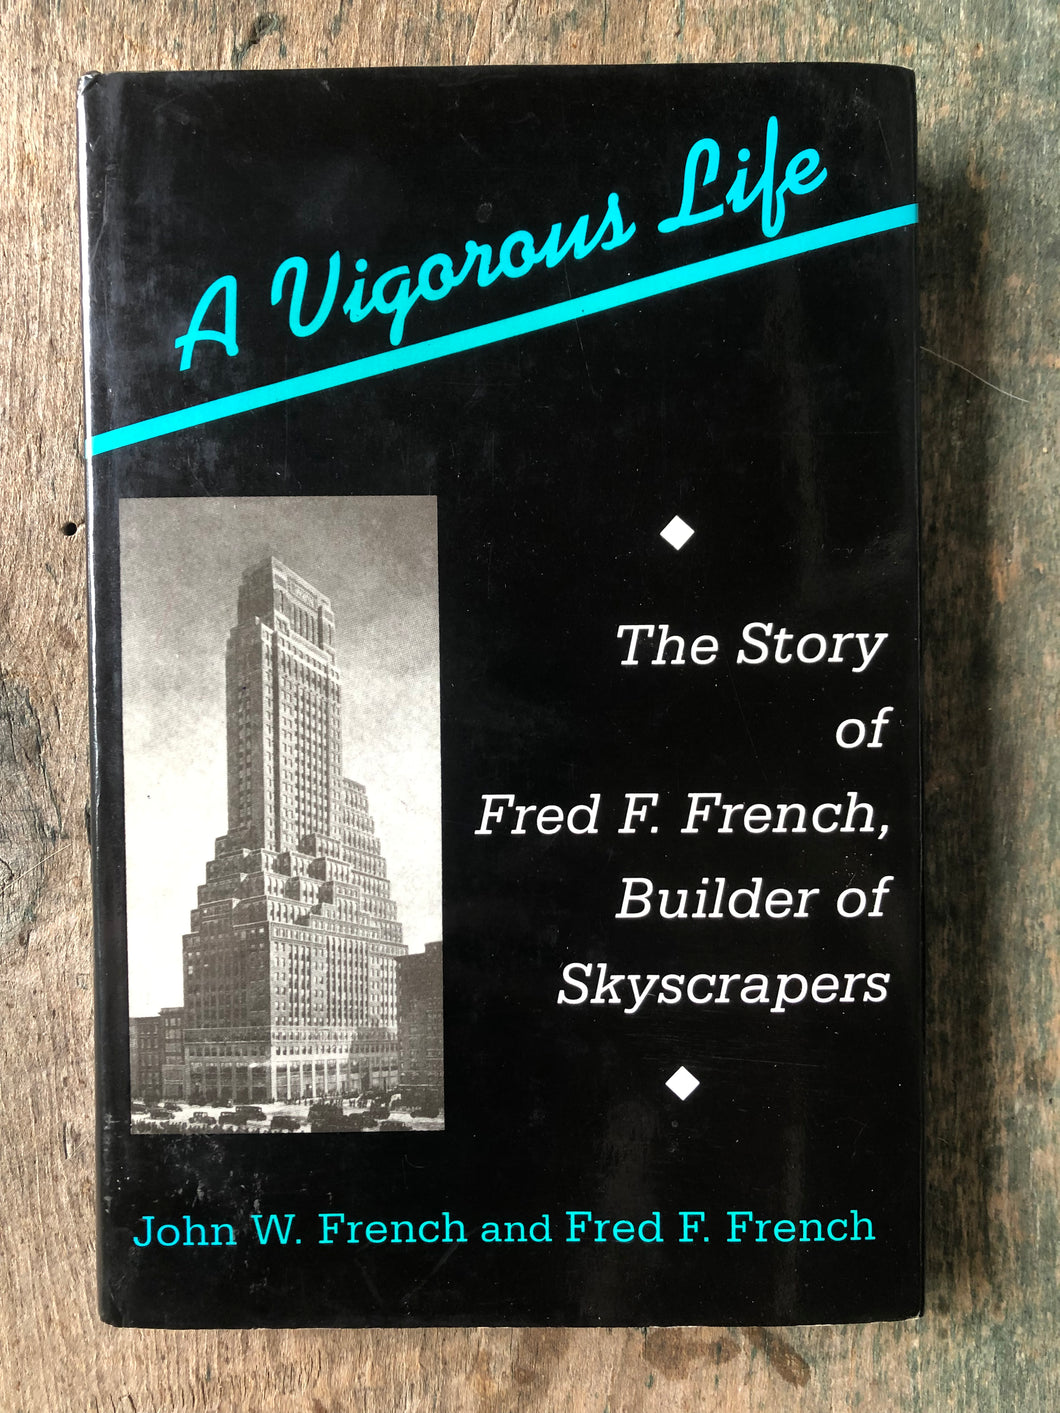 A Vigorous Life: The Story of Fred F. French, Builder of Skyscrapers. by John W. French and Fred F. French